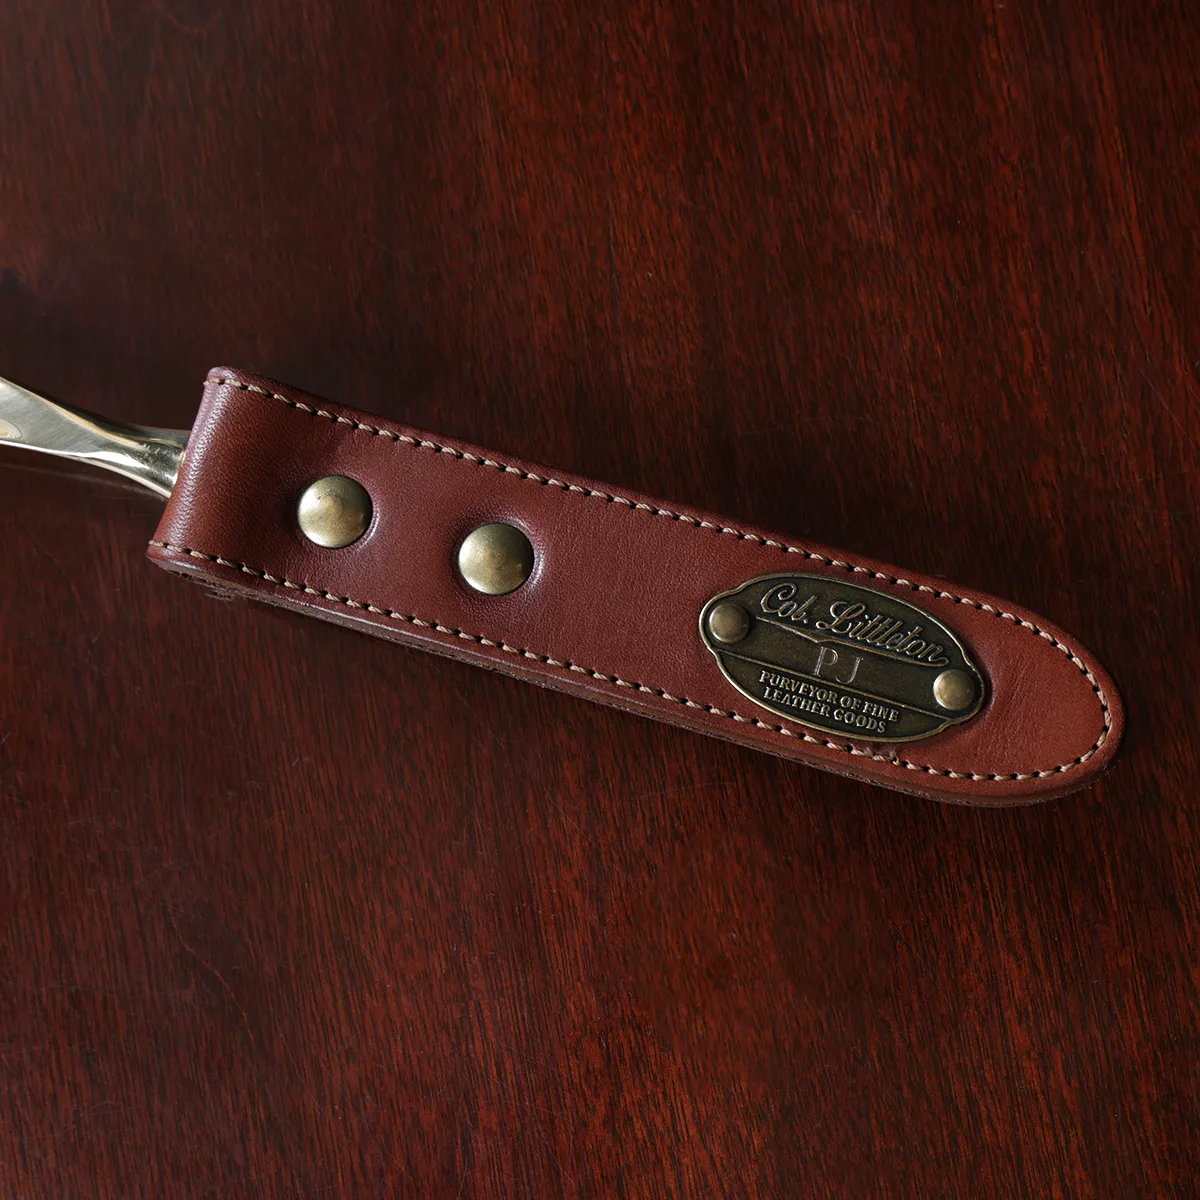 no2 shoehorn with personalization plate on a wooden table - view of handle